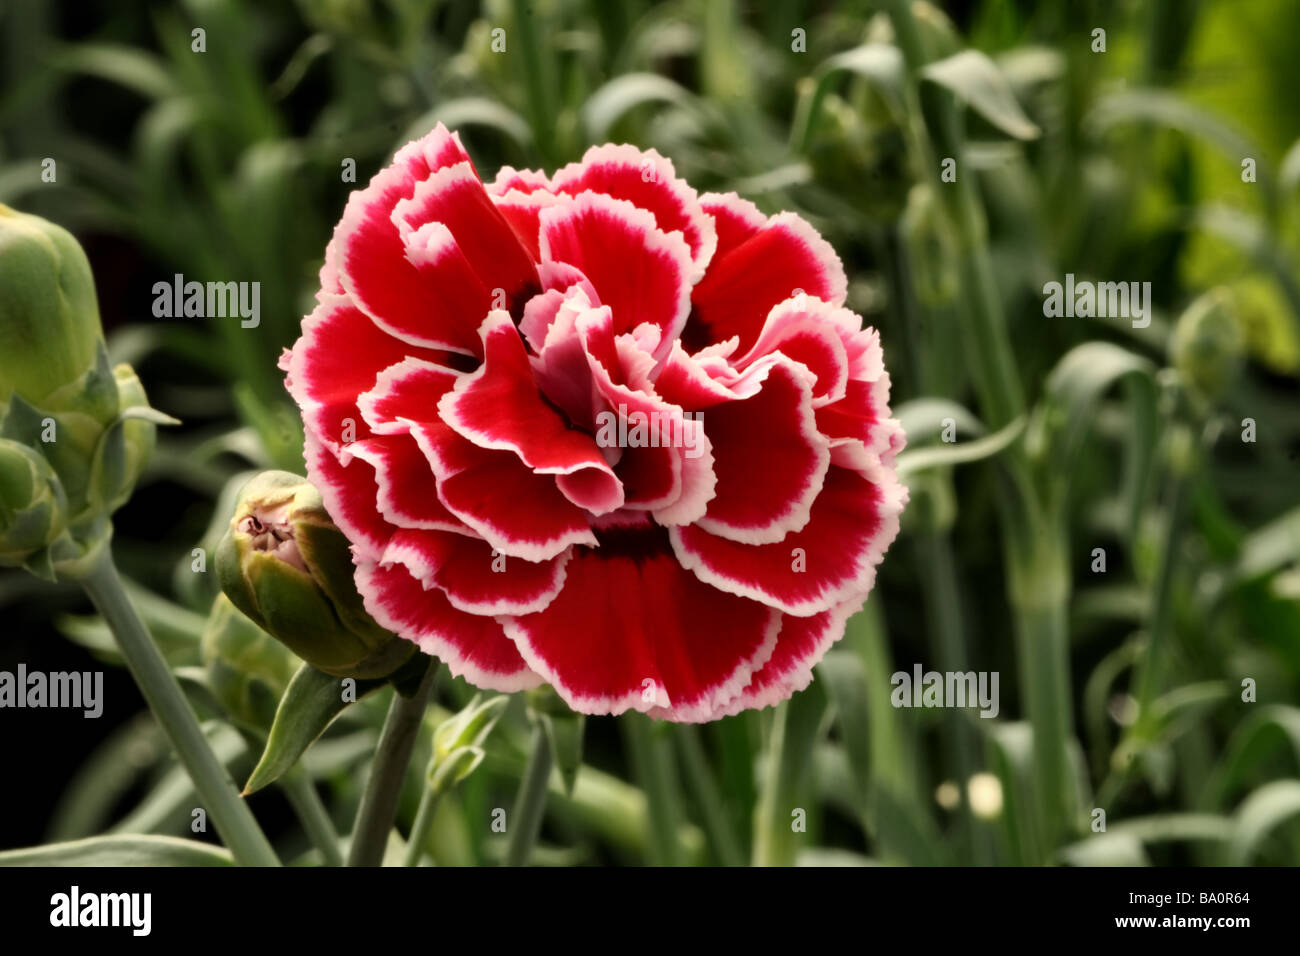 Dianthus , Family Caryophyllaceae Red bloom in close up or macro showing flower detail and structure Stock Photo